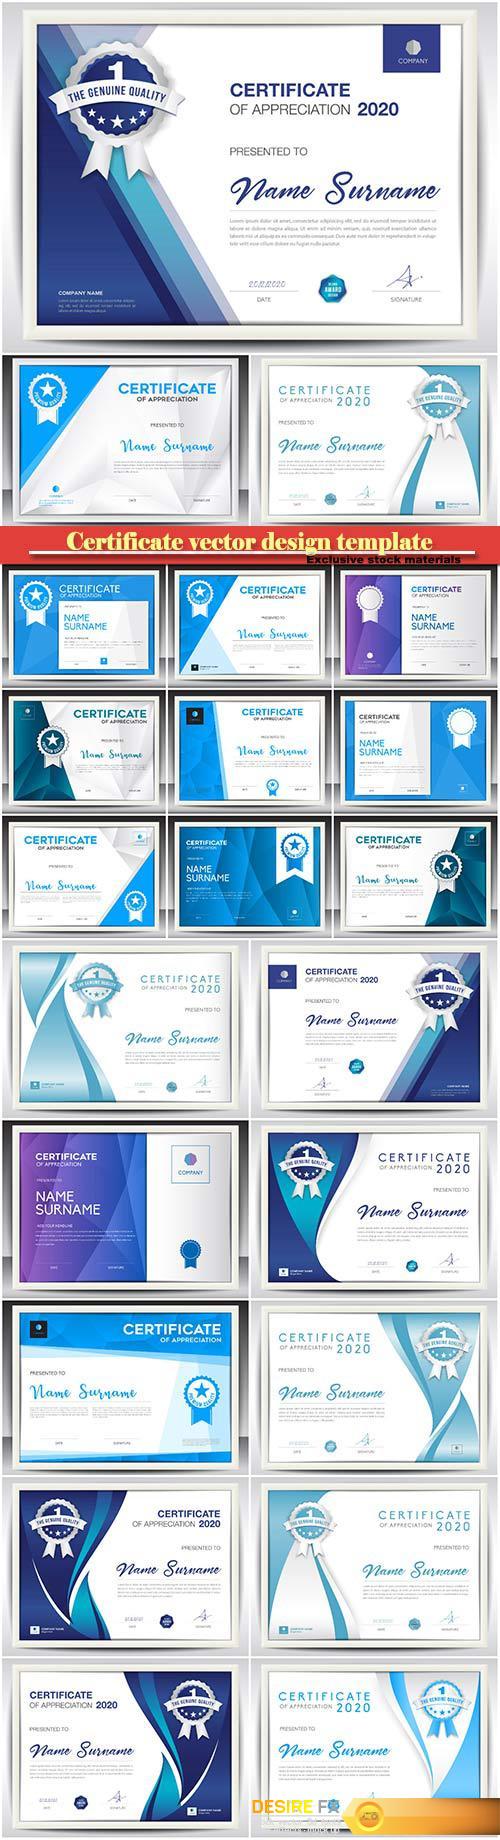 Certificate and vector diploma design template # 37